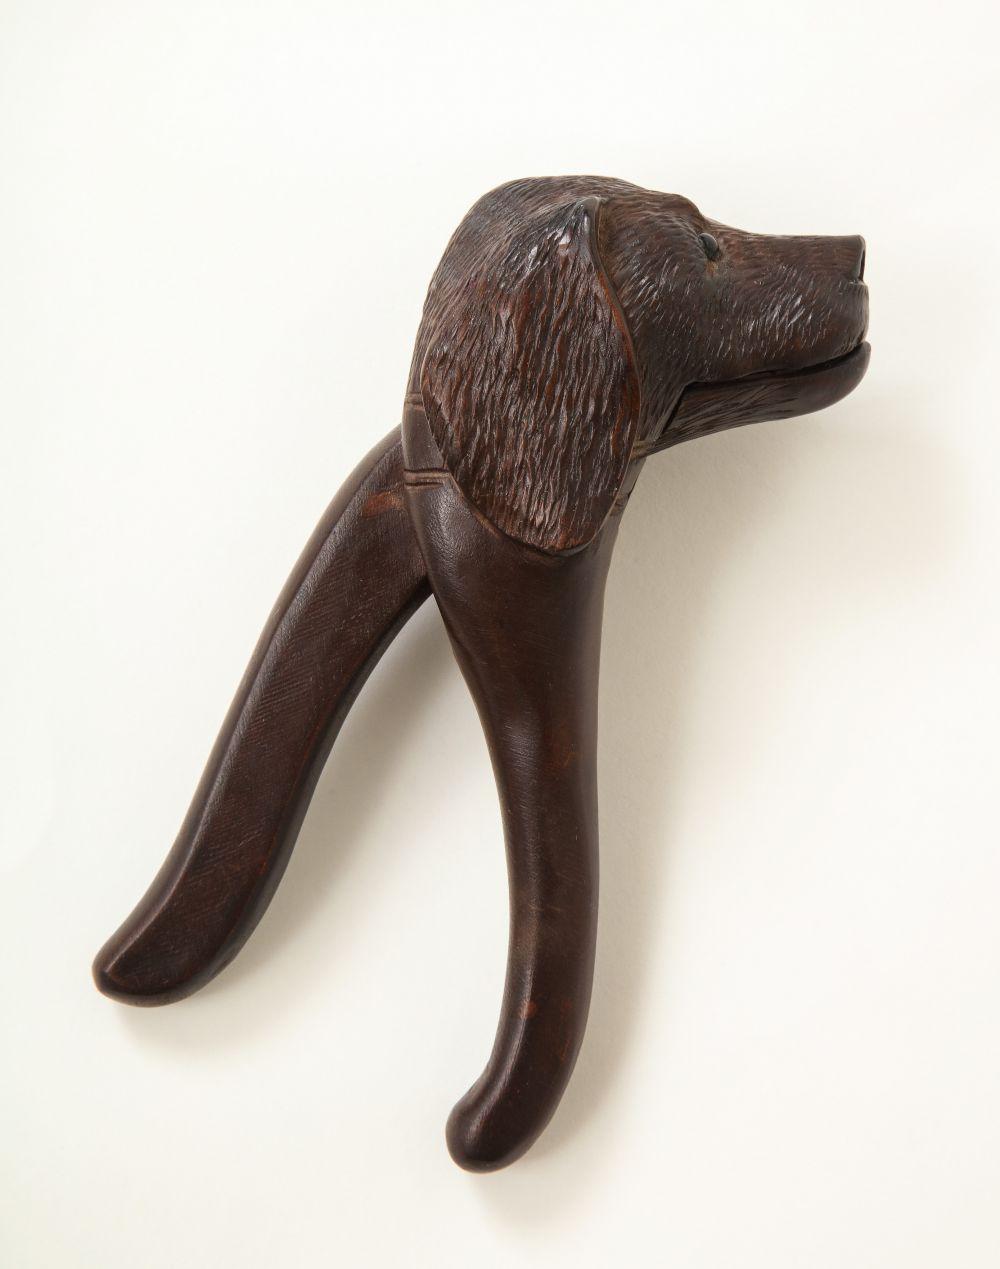 Carved Walnut Dog Nut Cracker In Good Condition For Sale In New York, NY